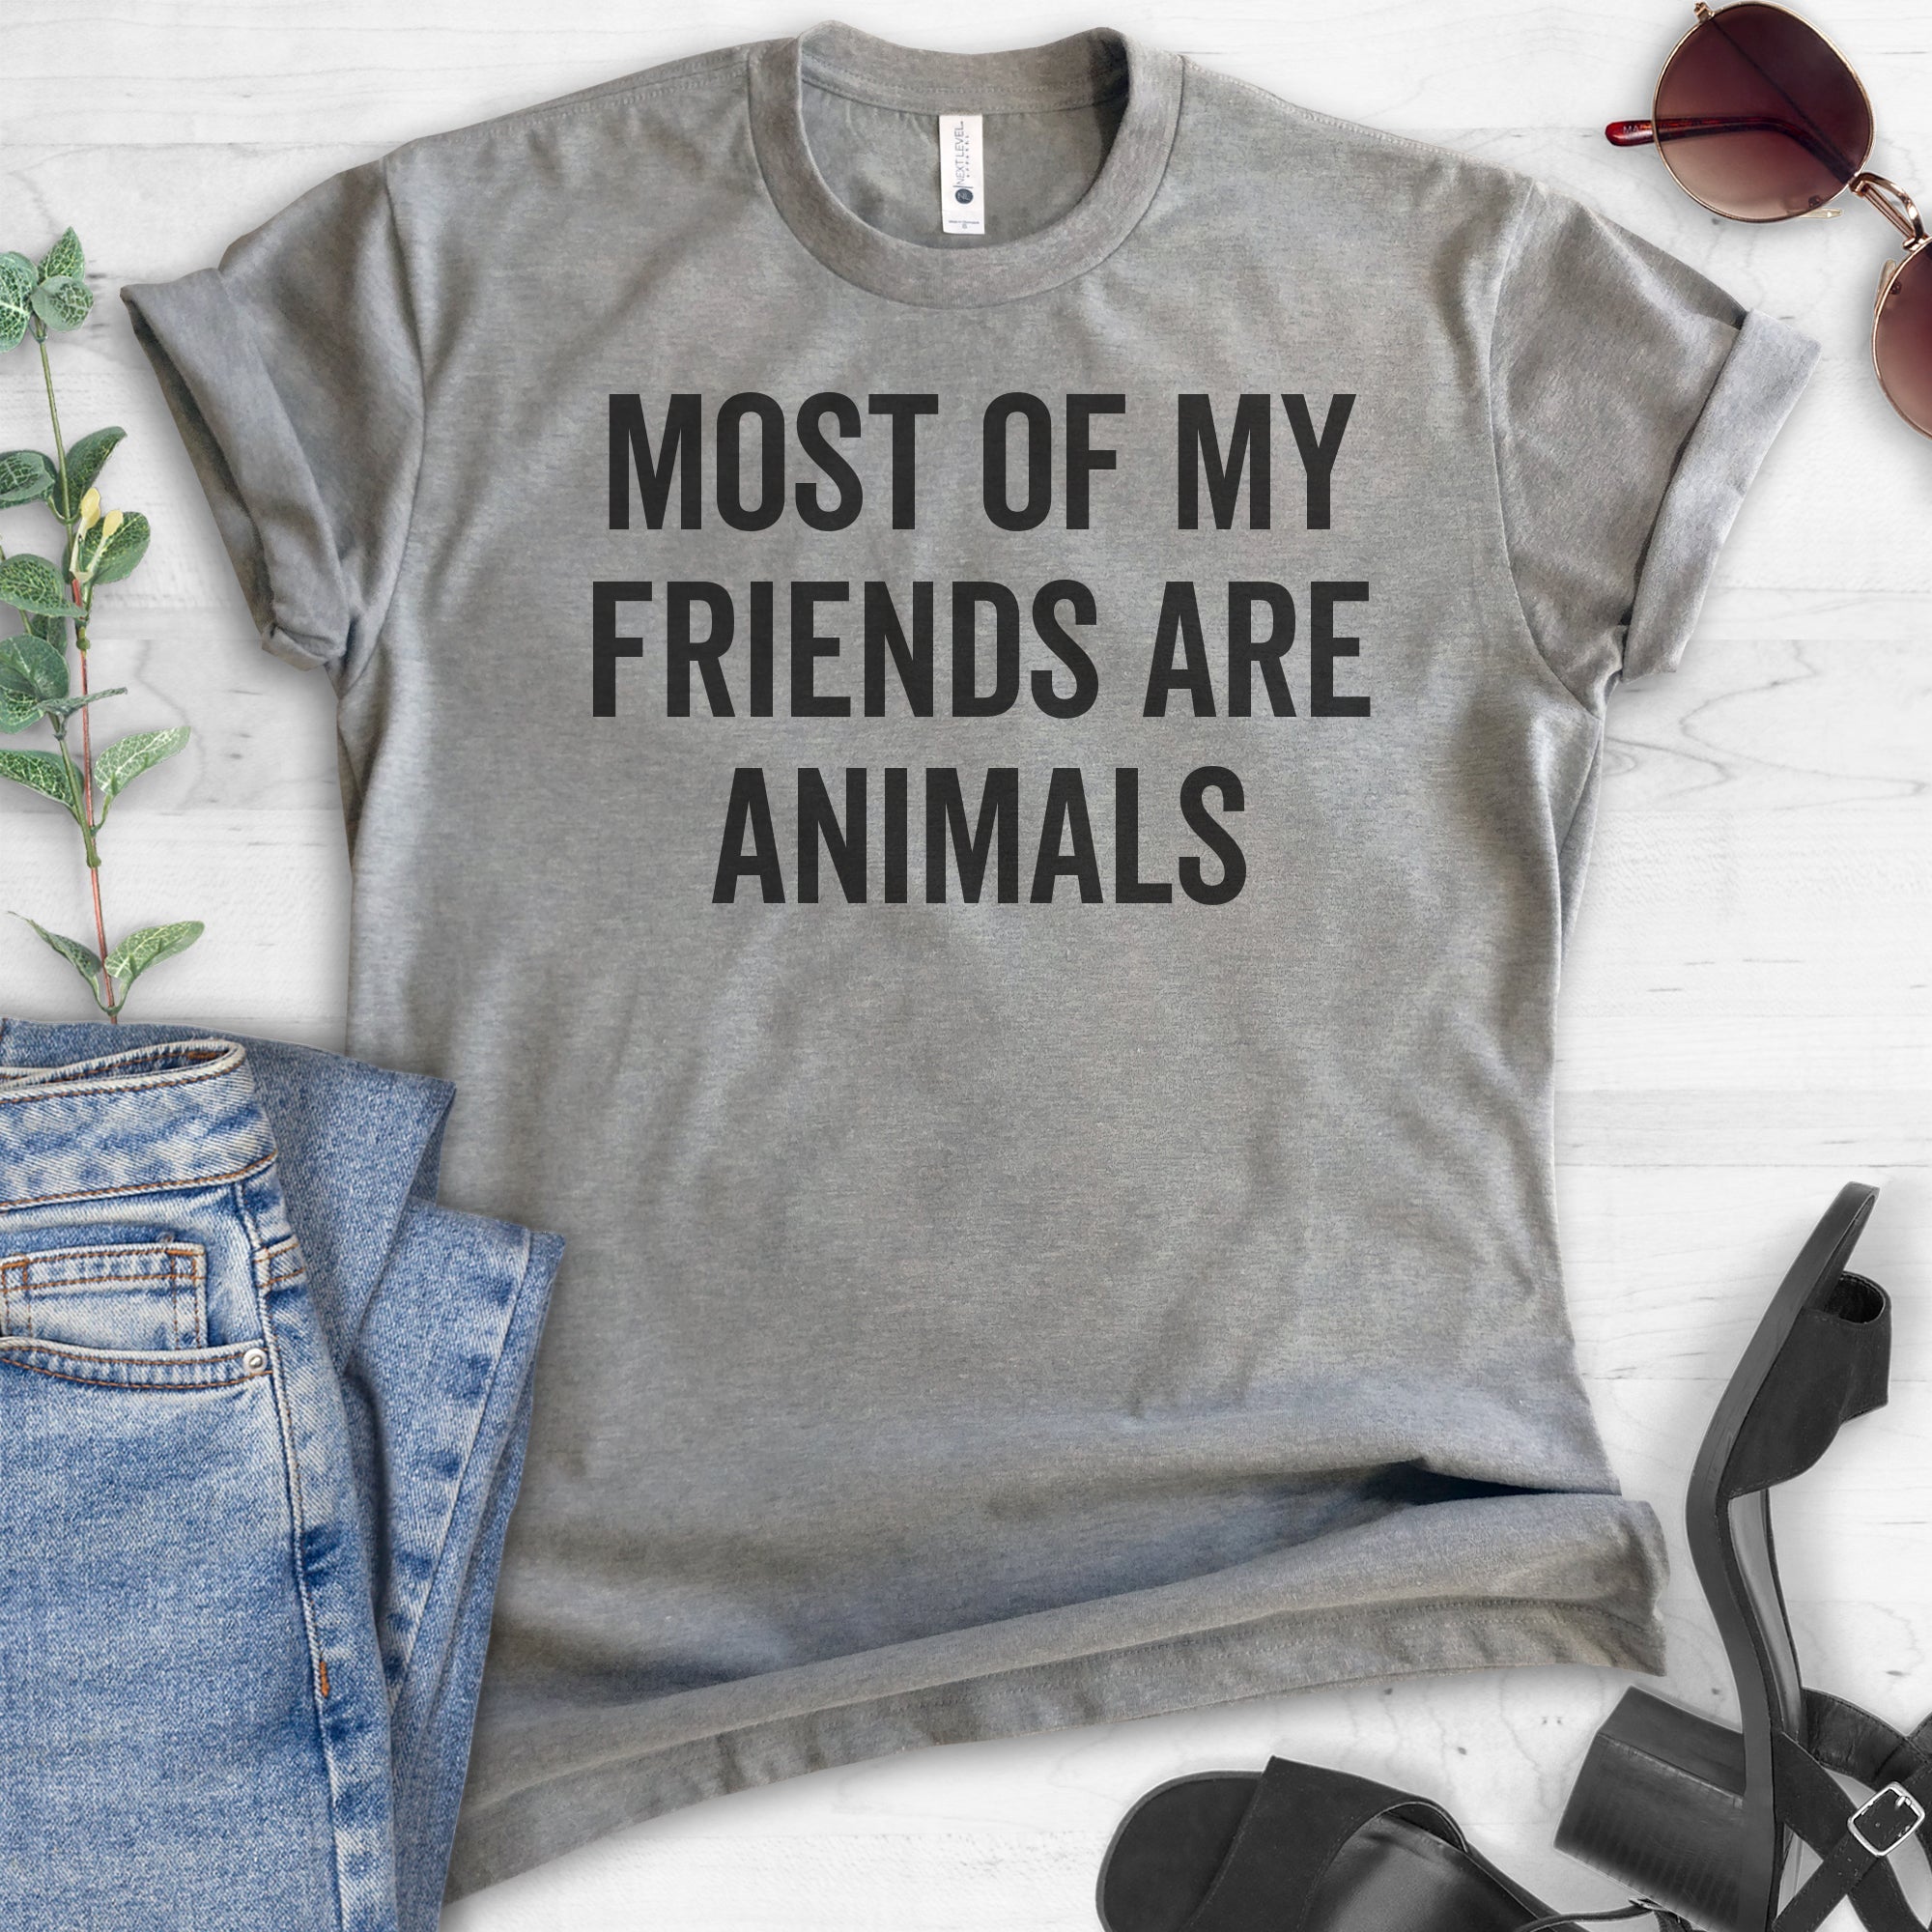 Most Of My Friends Are Animals T-shirt